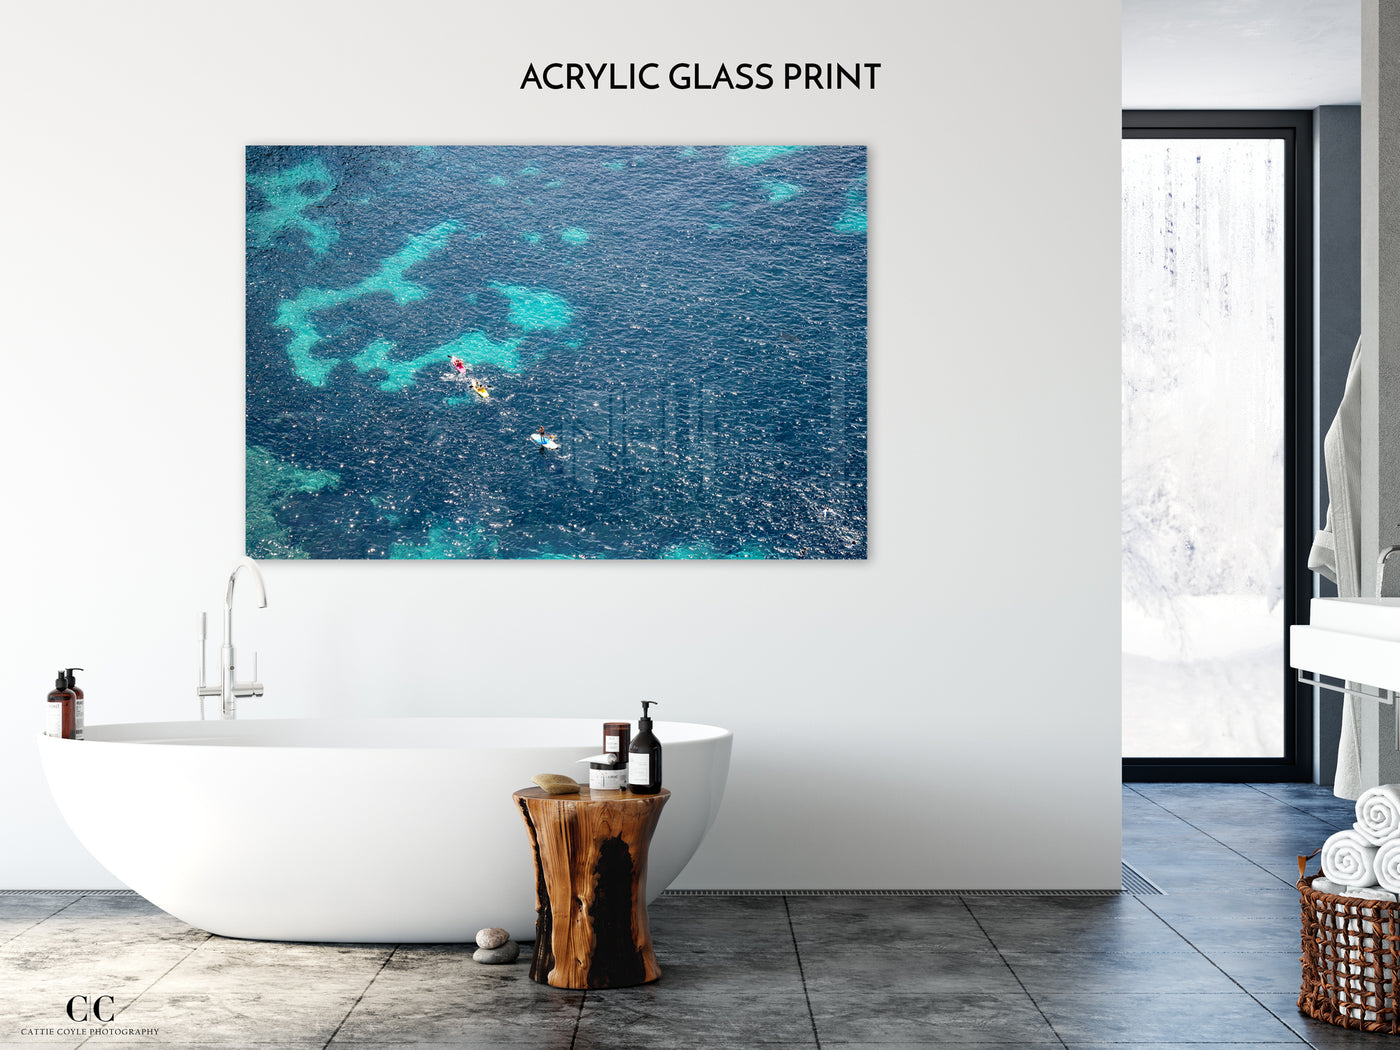 Cote d'Azur - Mediterranean Sea aerial acrylic glass print by Cattie Coyle Photography